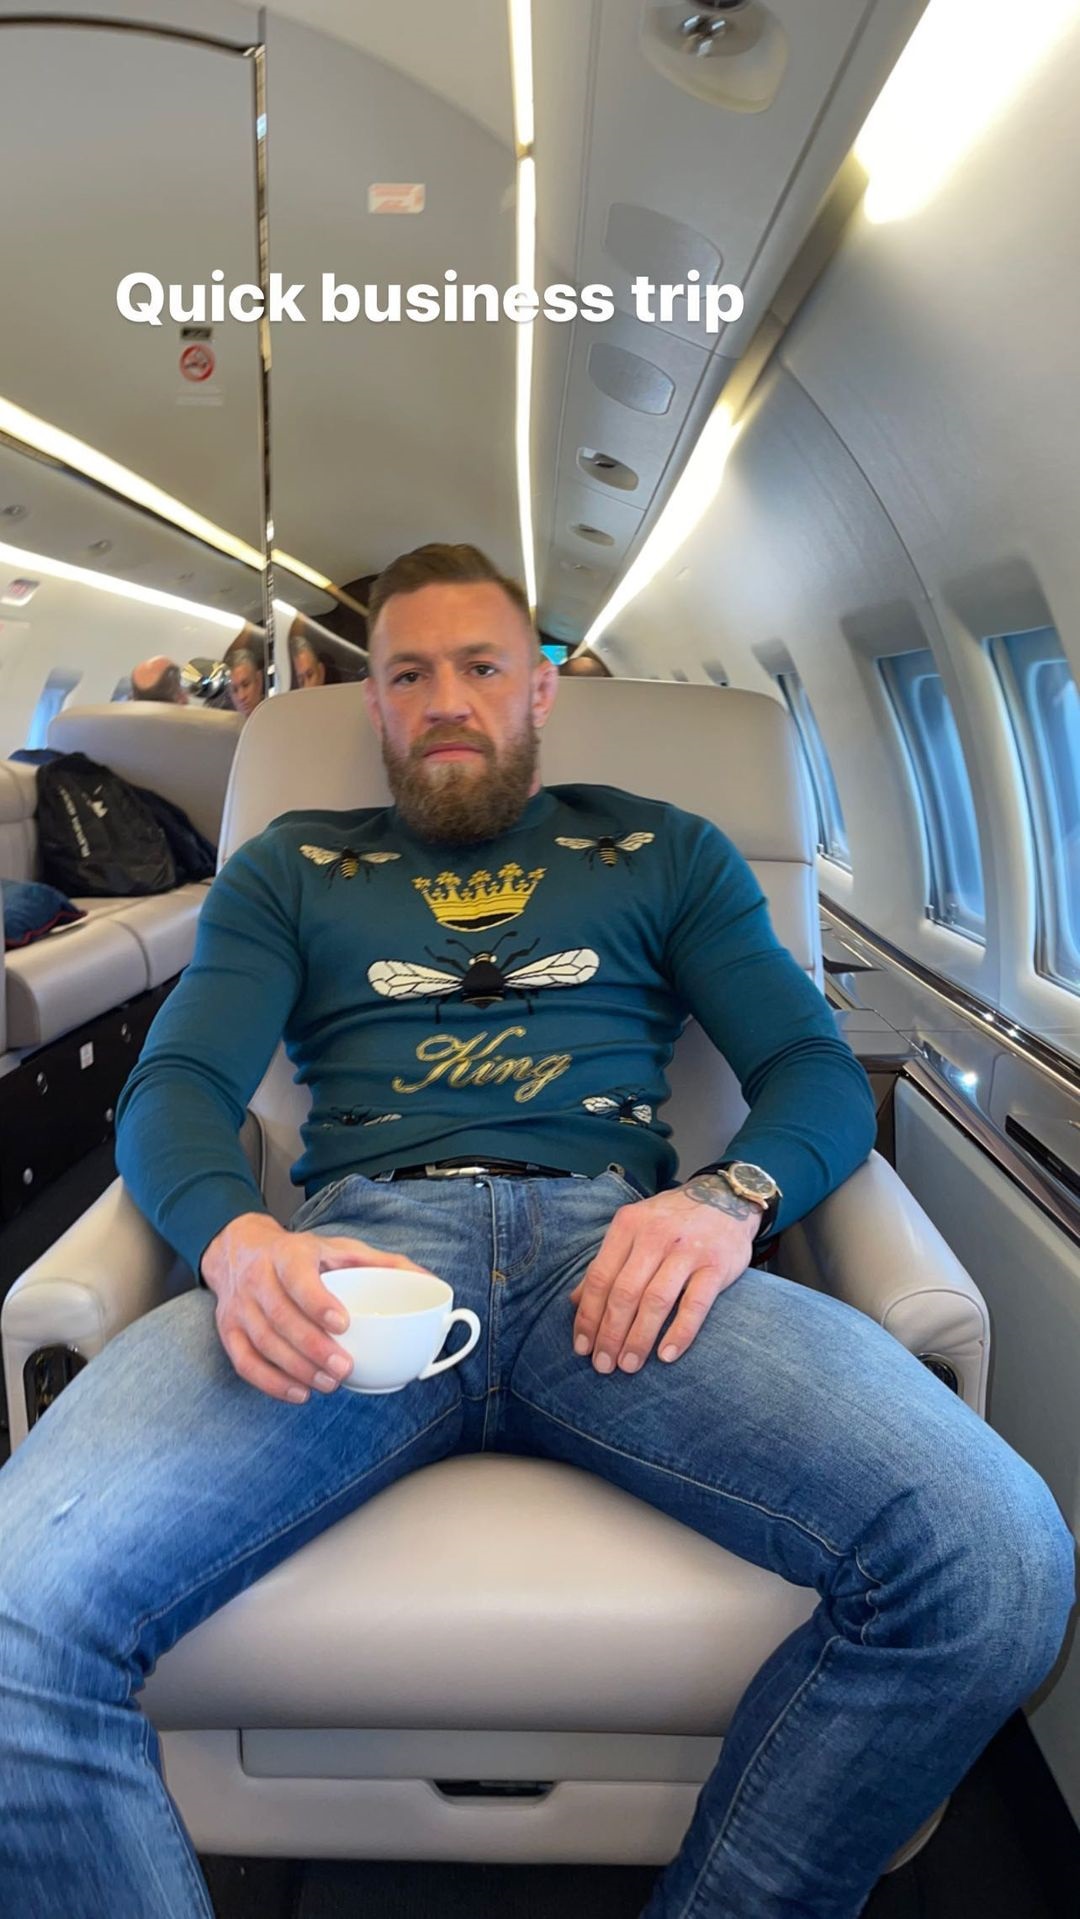 Conor McGregor and Dee Devlin take a private flight to go on a mystery business trip. UFC star Conor McGregor prepares for his return